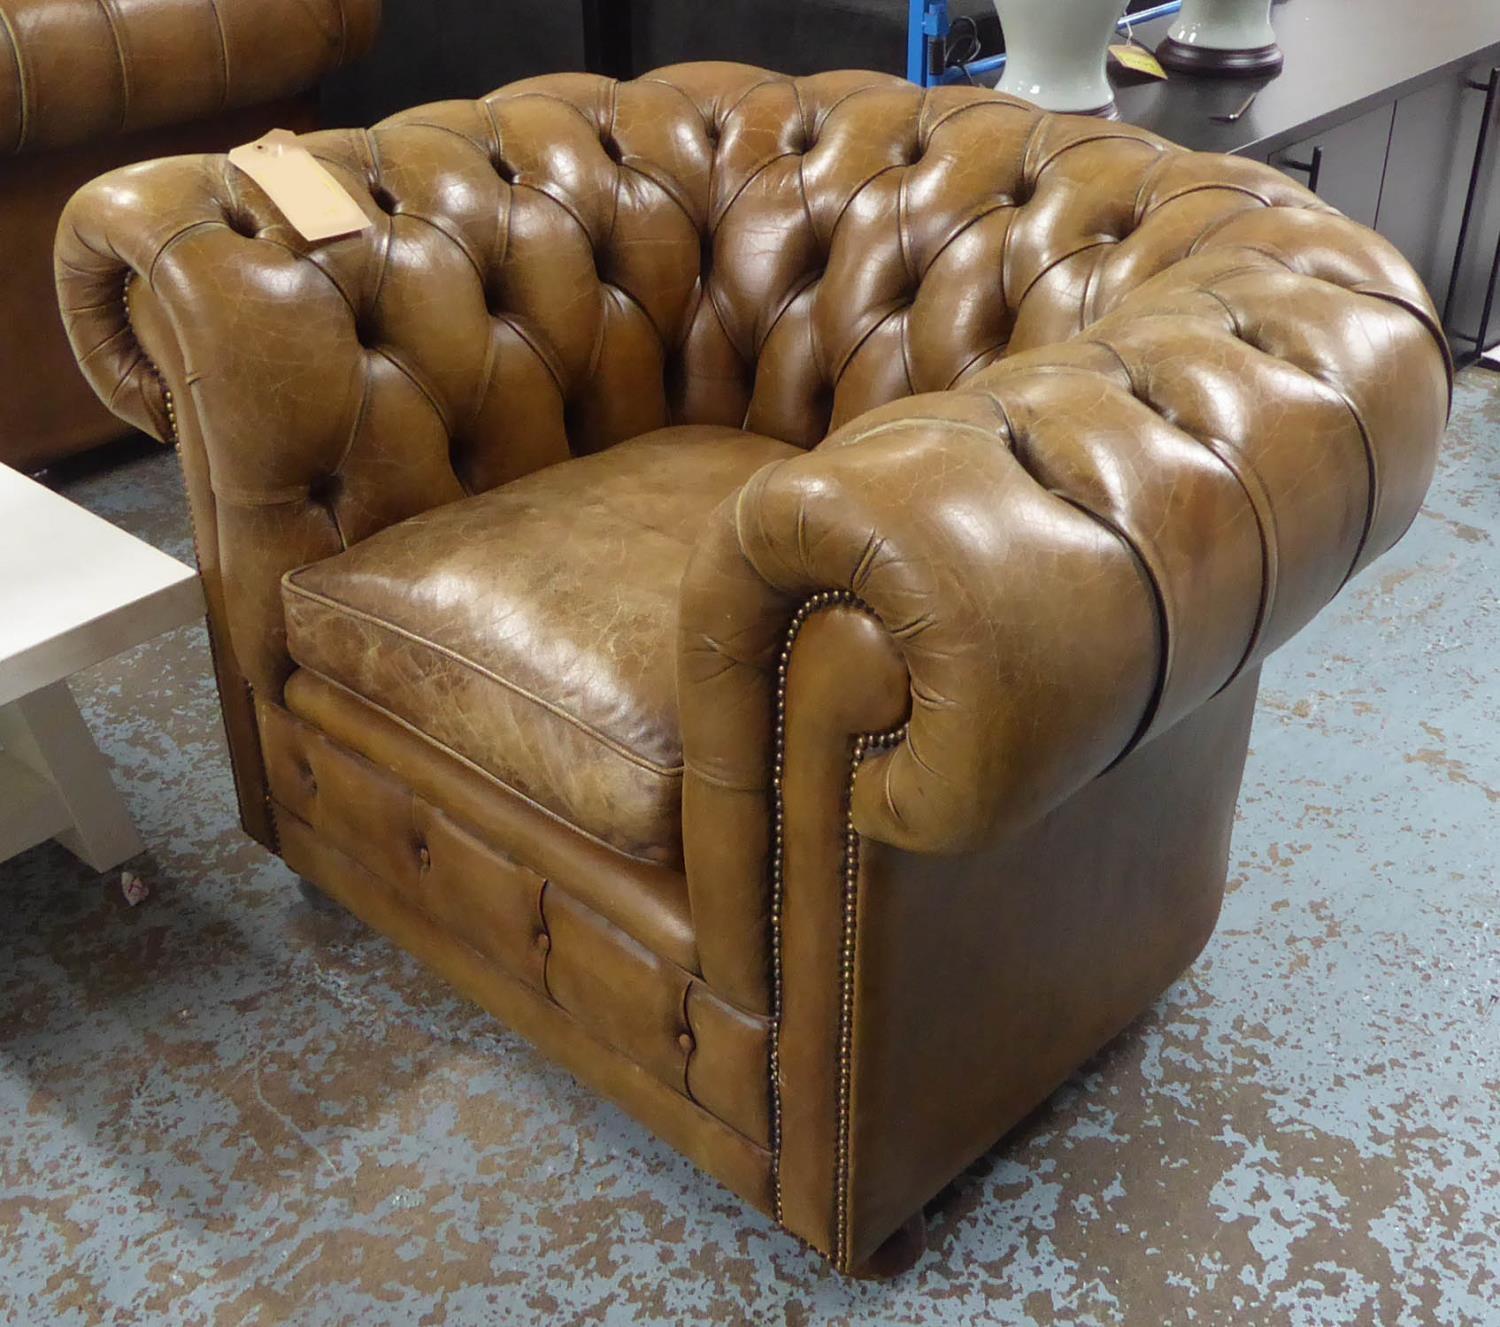 CHESTERFIELD STYLE ARMCHAIR, to match previous lot, 85cm D x 108cm W x 76cm H.